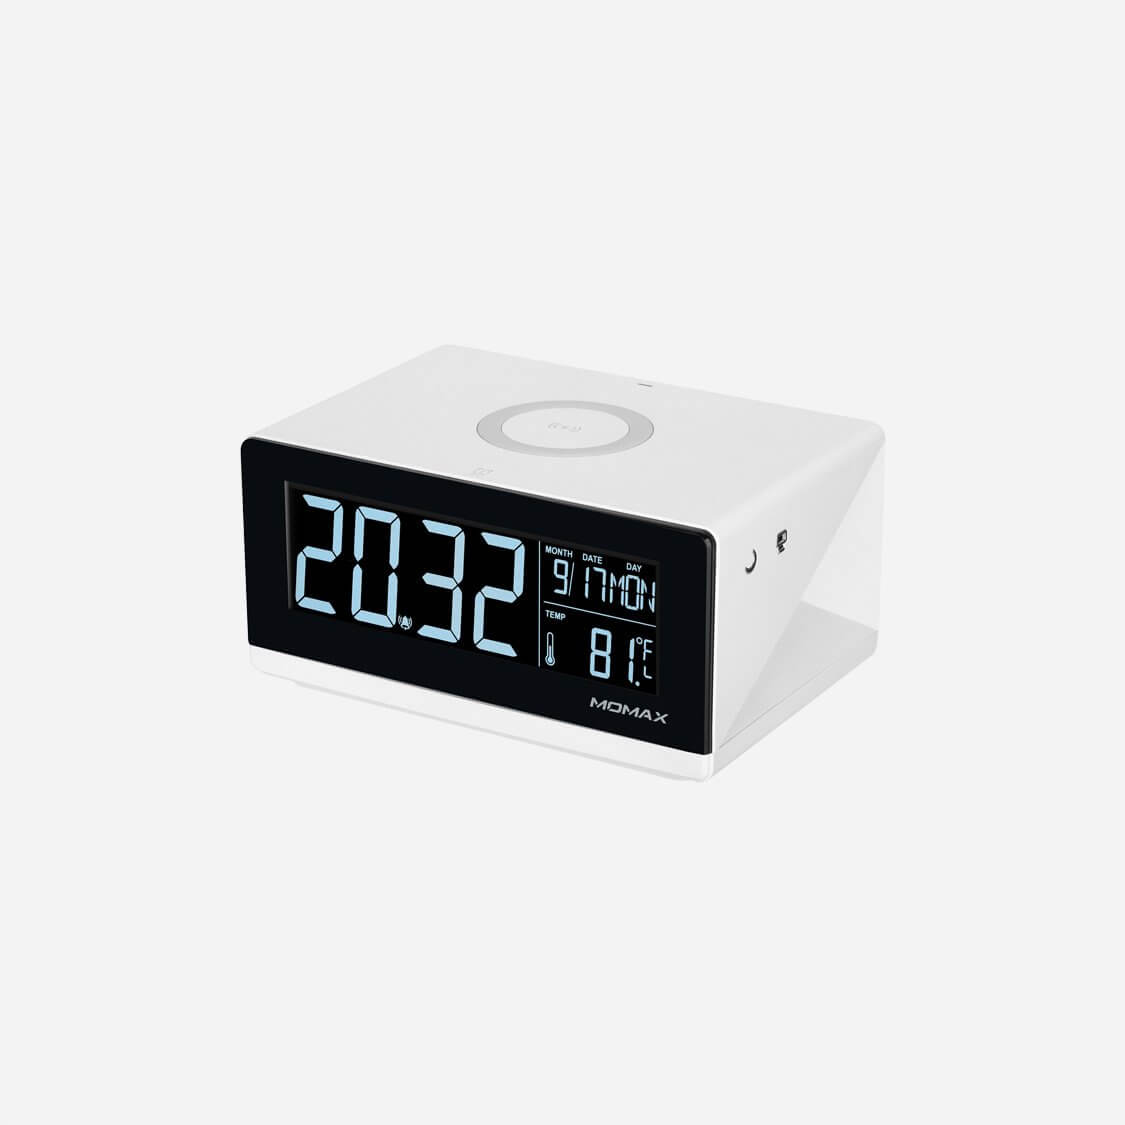 The Great Get Together Wireless Charger Alarm Clock Bedside Lamp